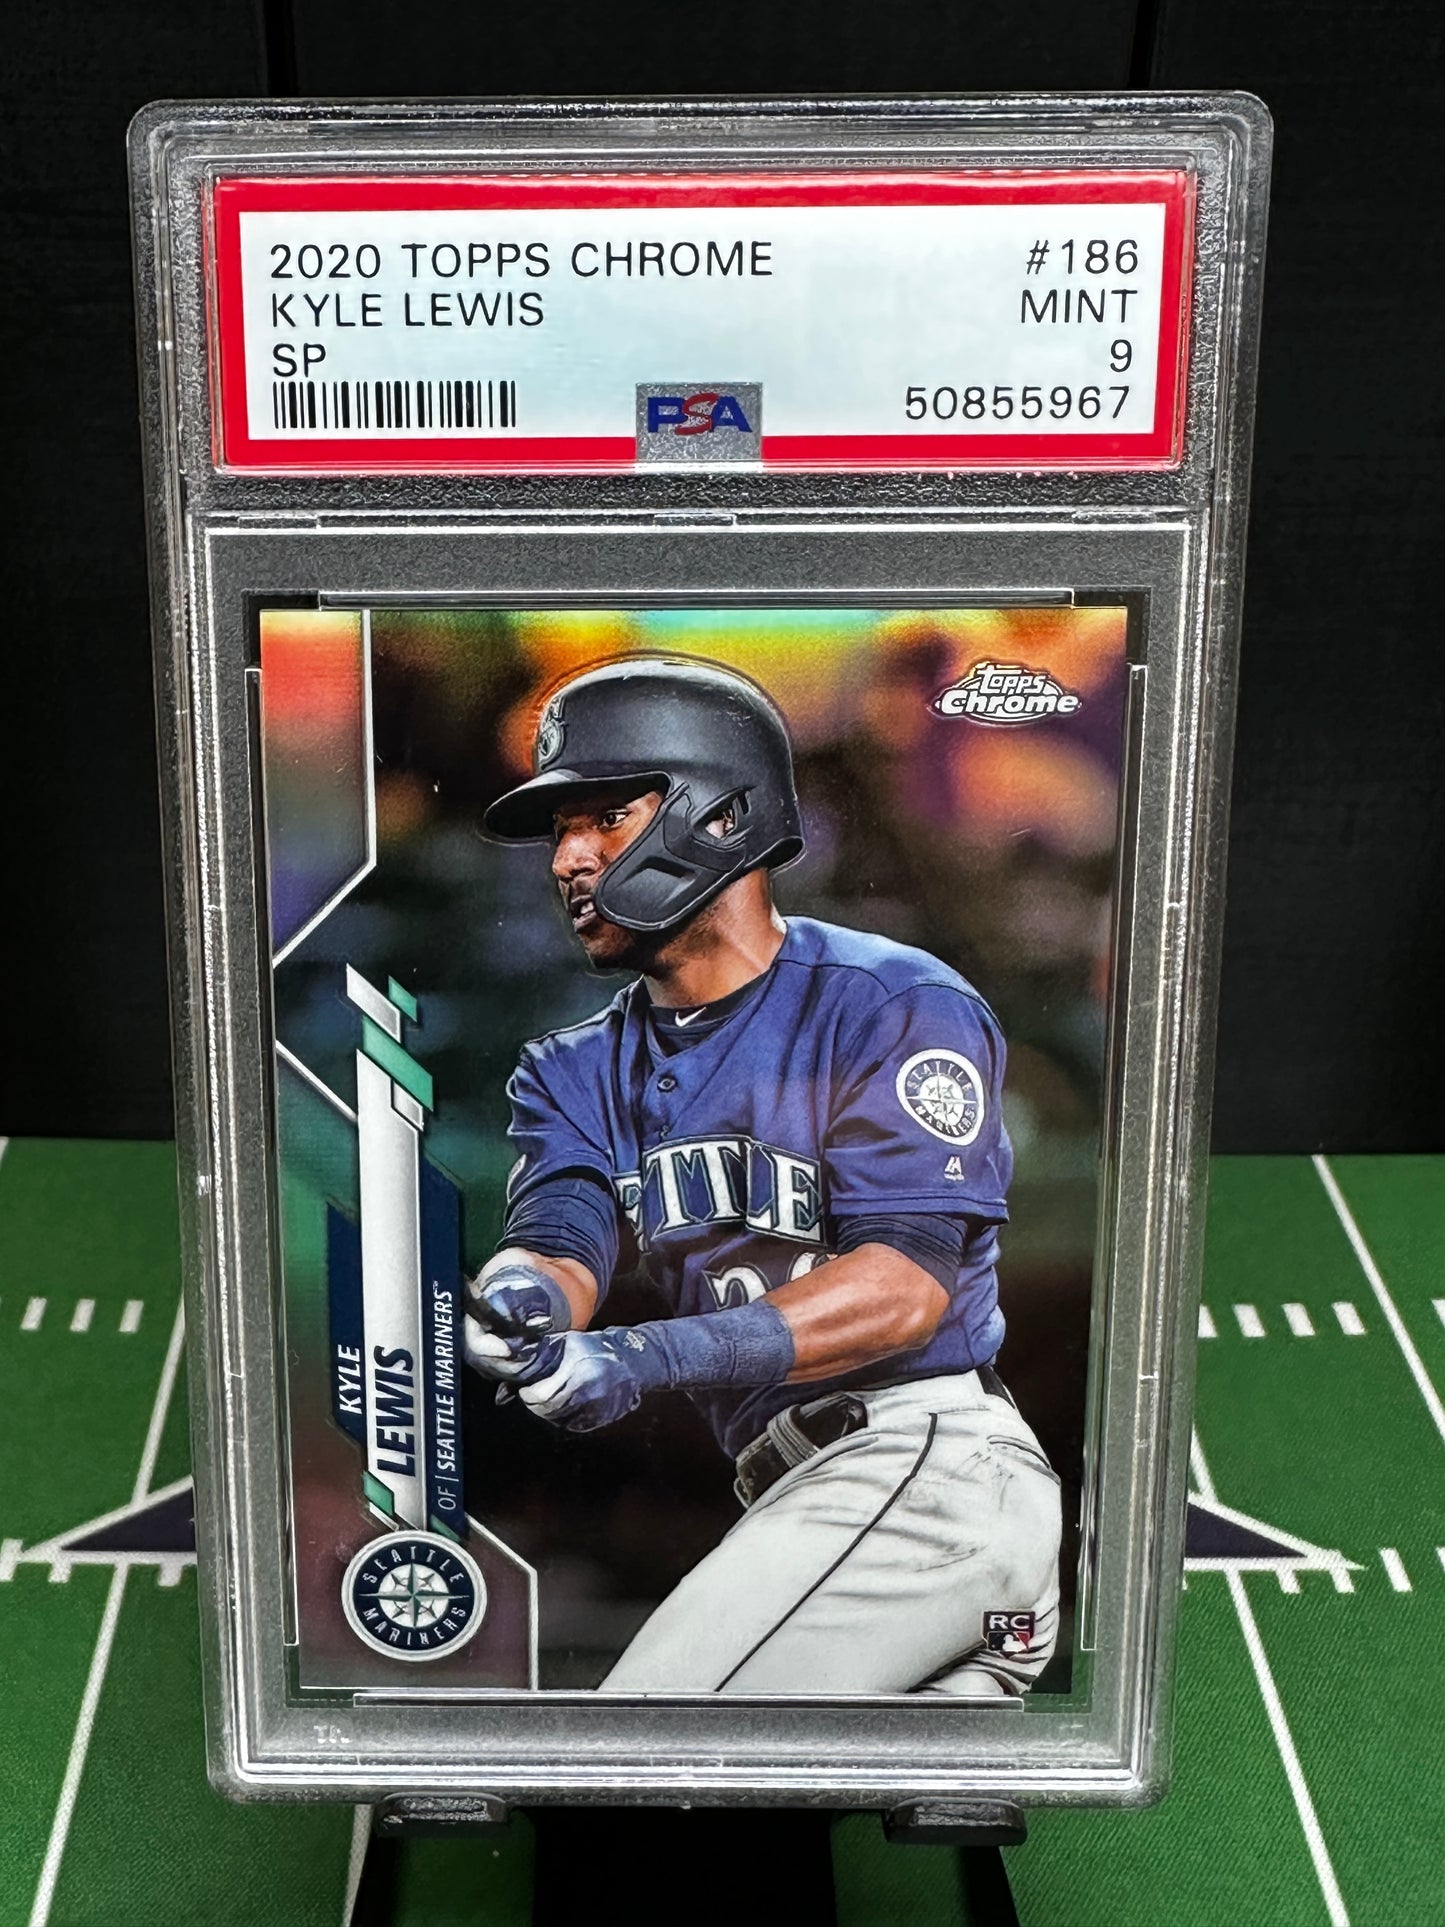 2020 Topps Chrome Kyle Lewis SP Variation Refractor Rookie PSA 10 RC